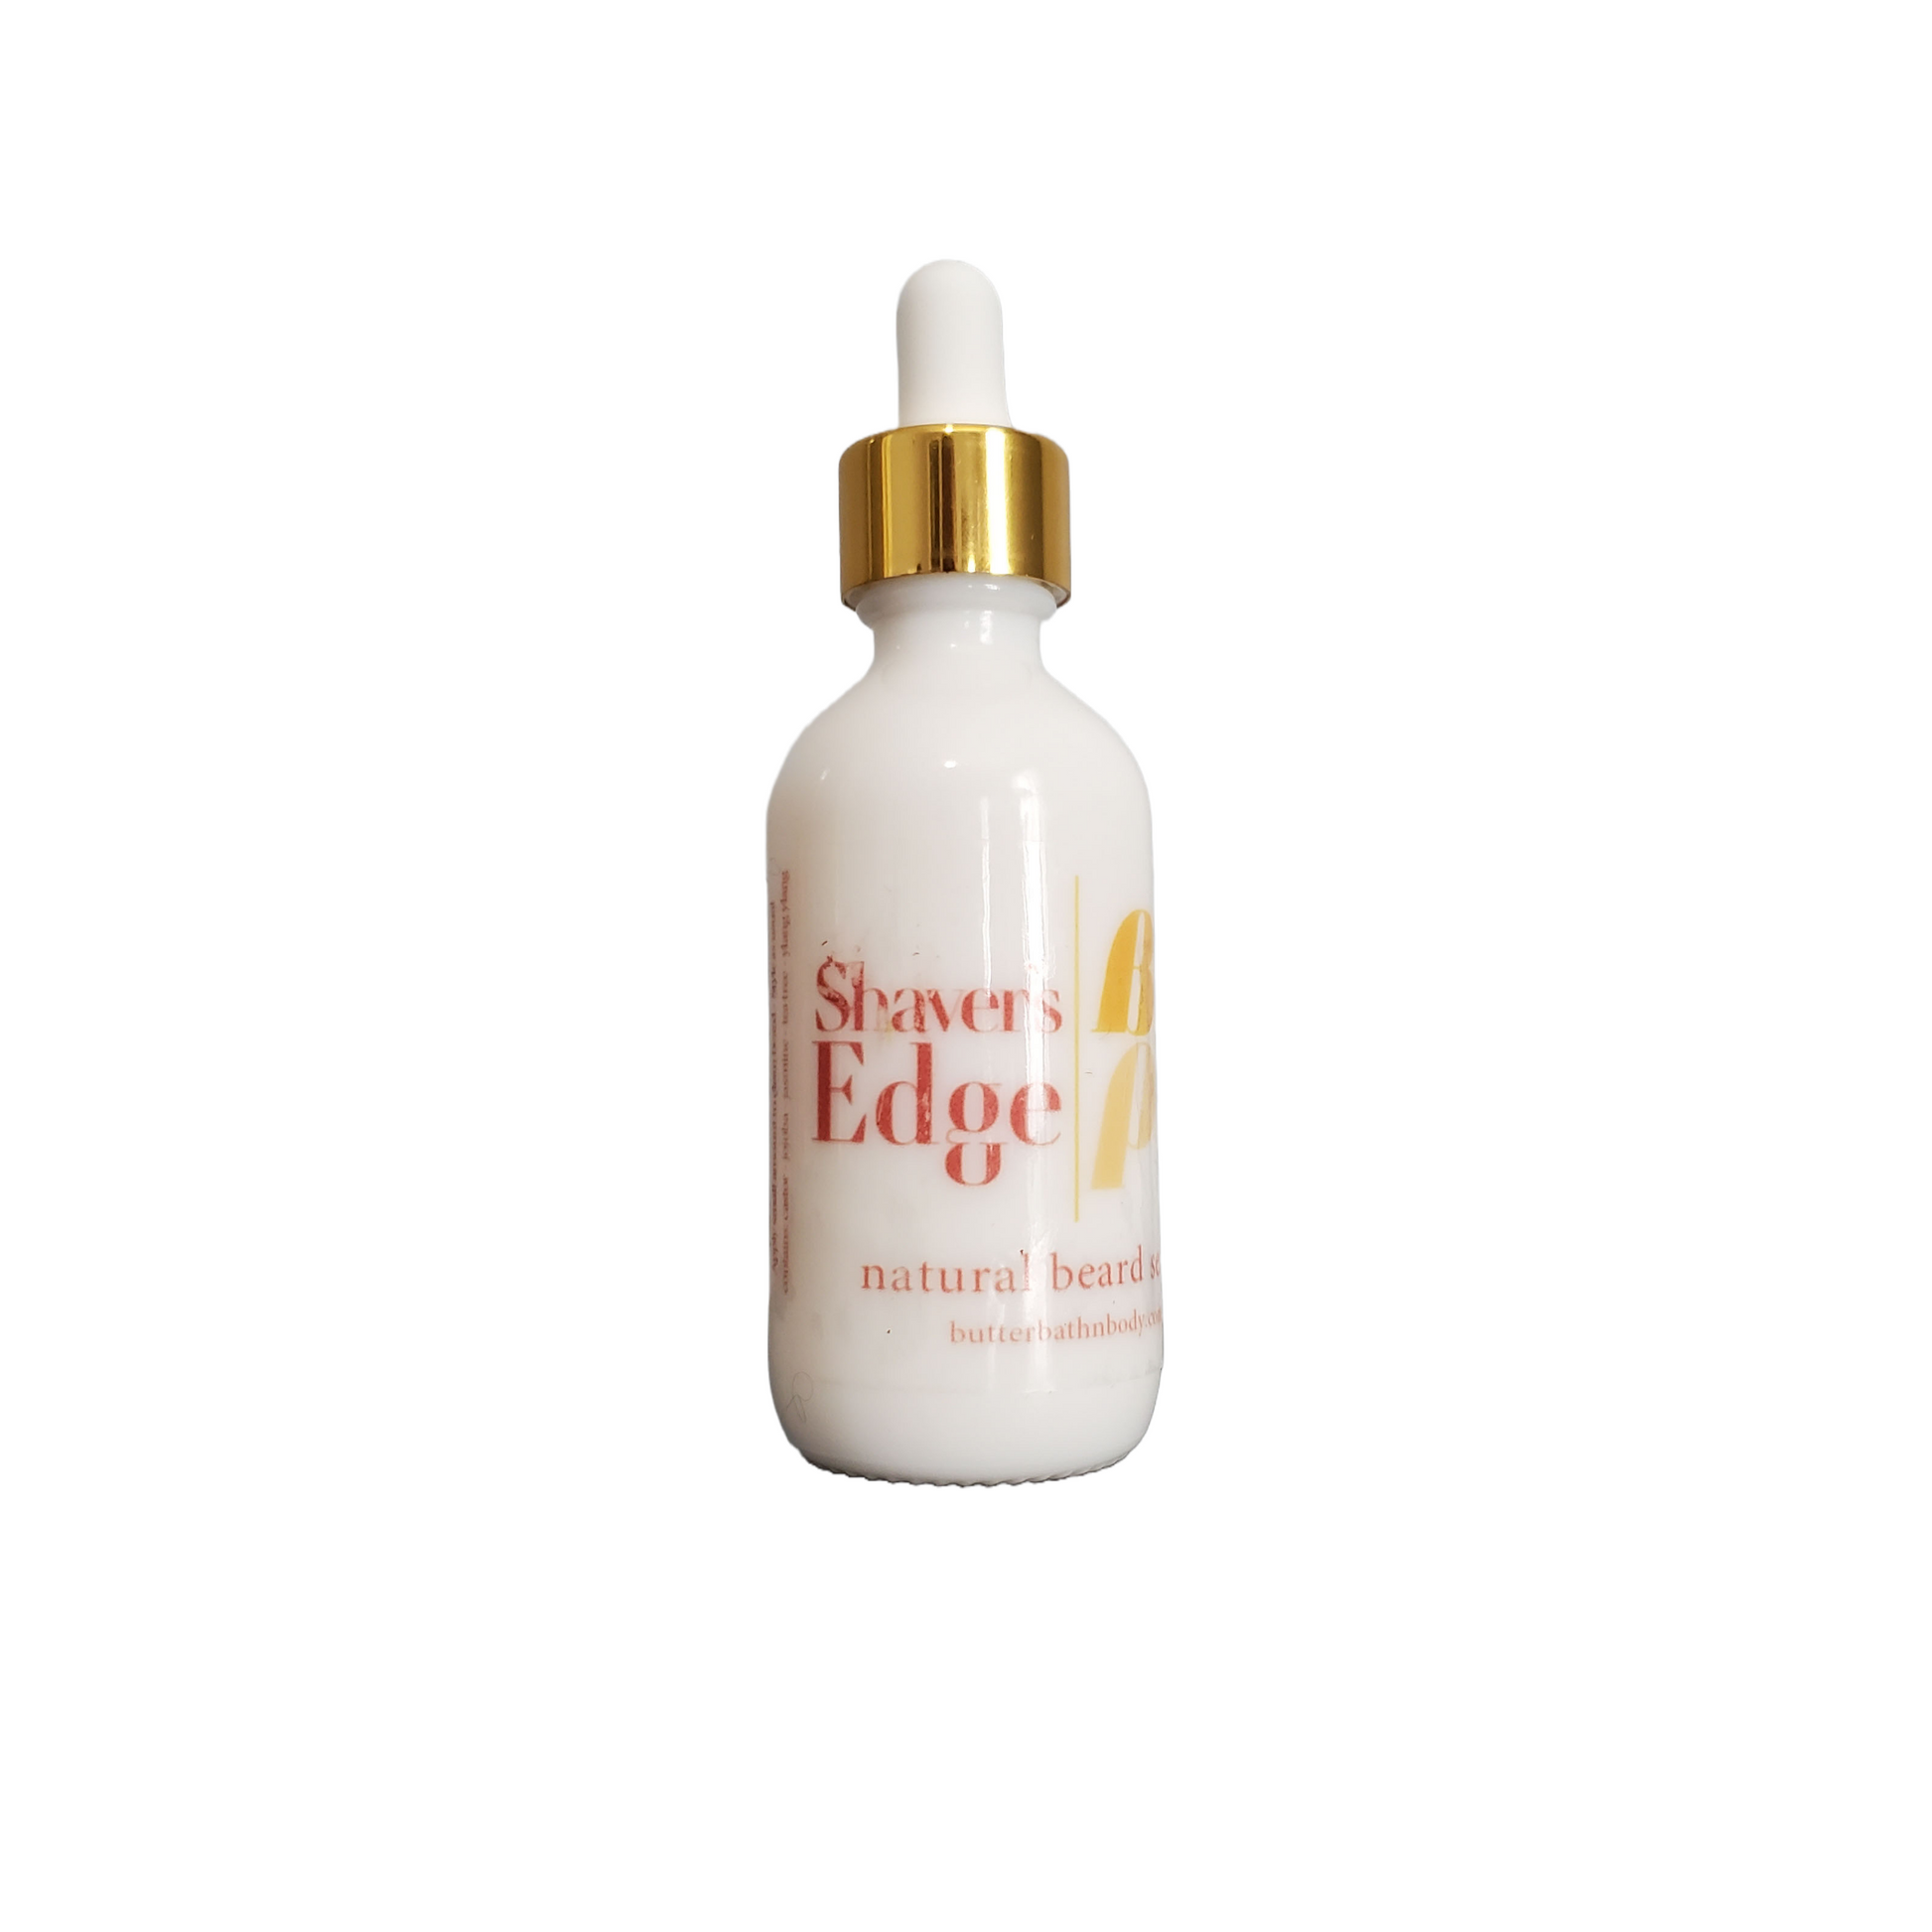 Image of Shaver's Edge Natural Beard Serum in a closed small white glass bottle with a white bulb dropper and gold band.